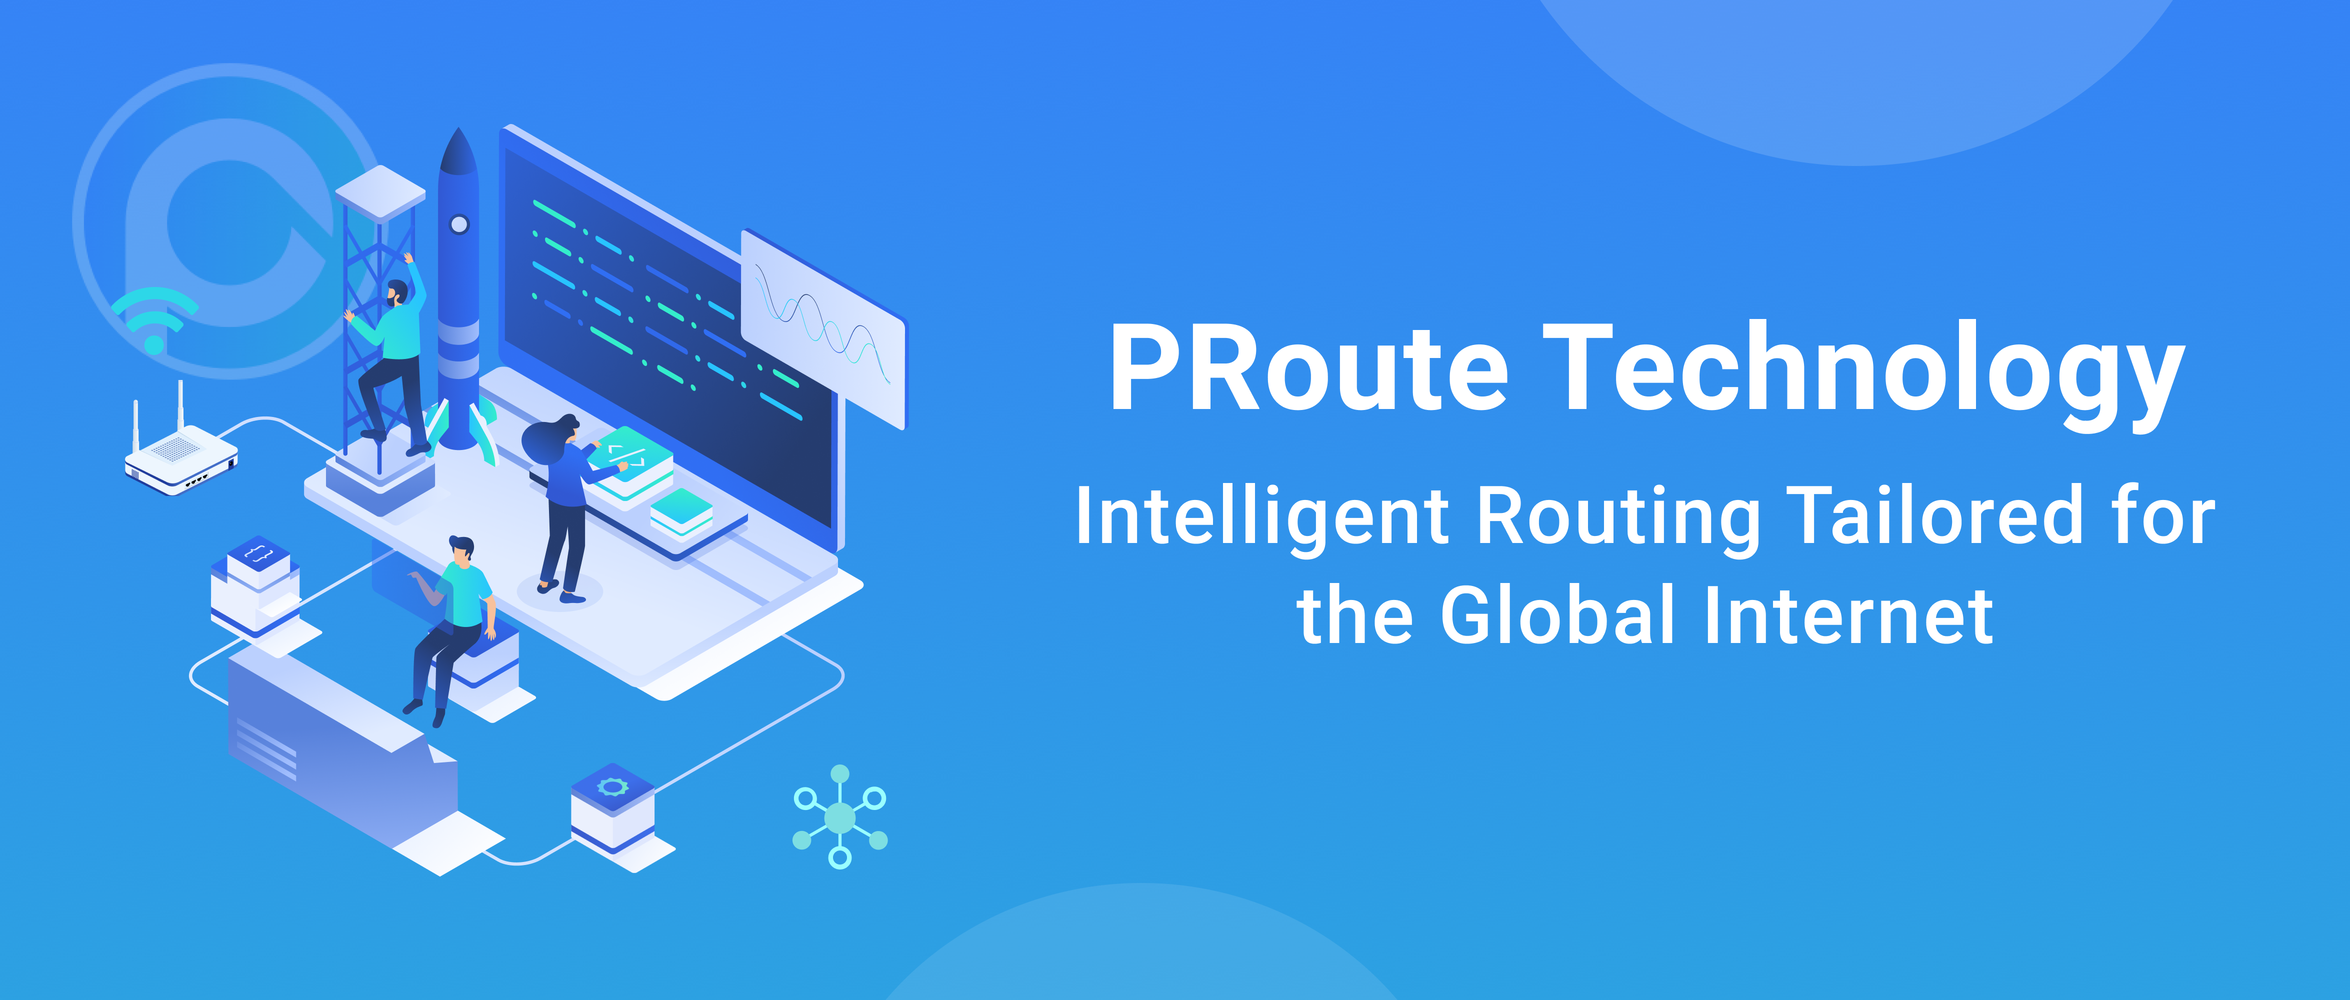 PRoute Technology: Intelligent Routing Tailored for the Global Internet